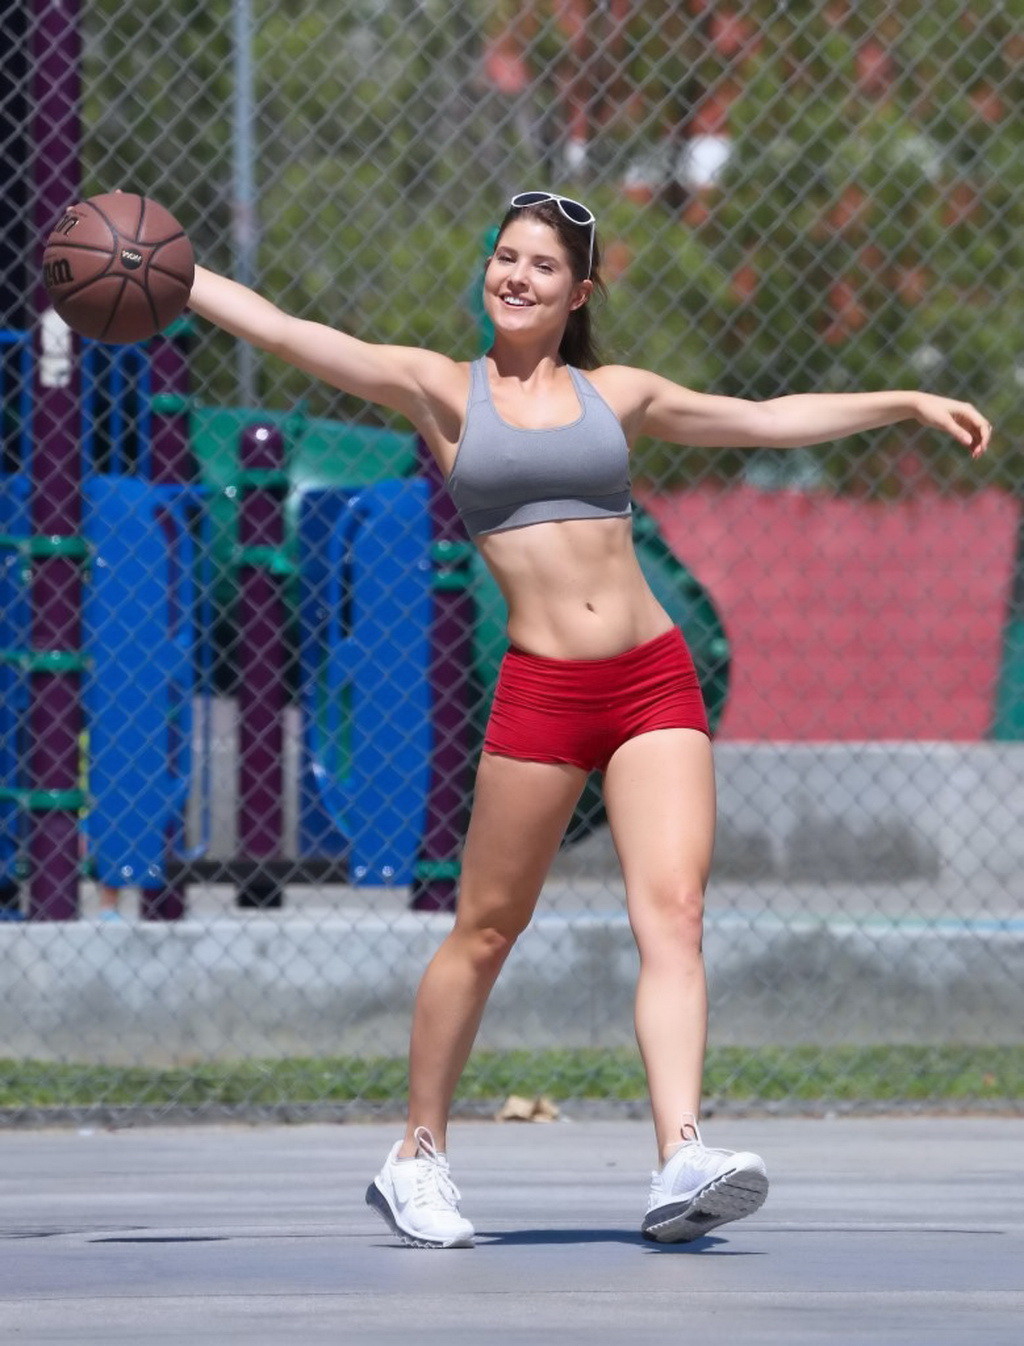 Amanda Cerny busty showing her pokies and ass while plays basketball in Beverly  #75187922